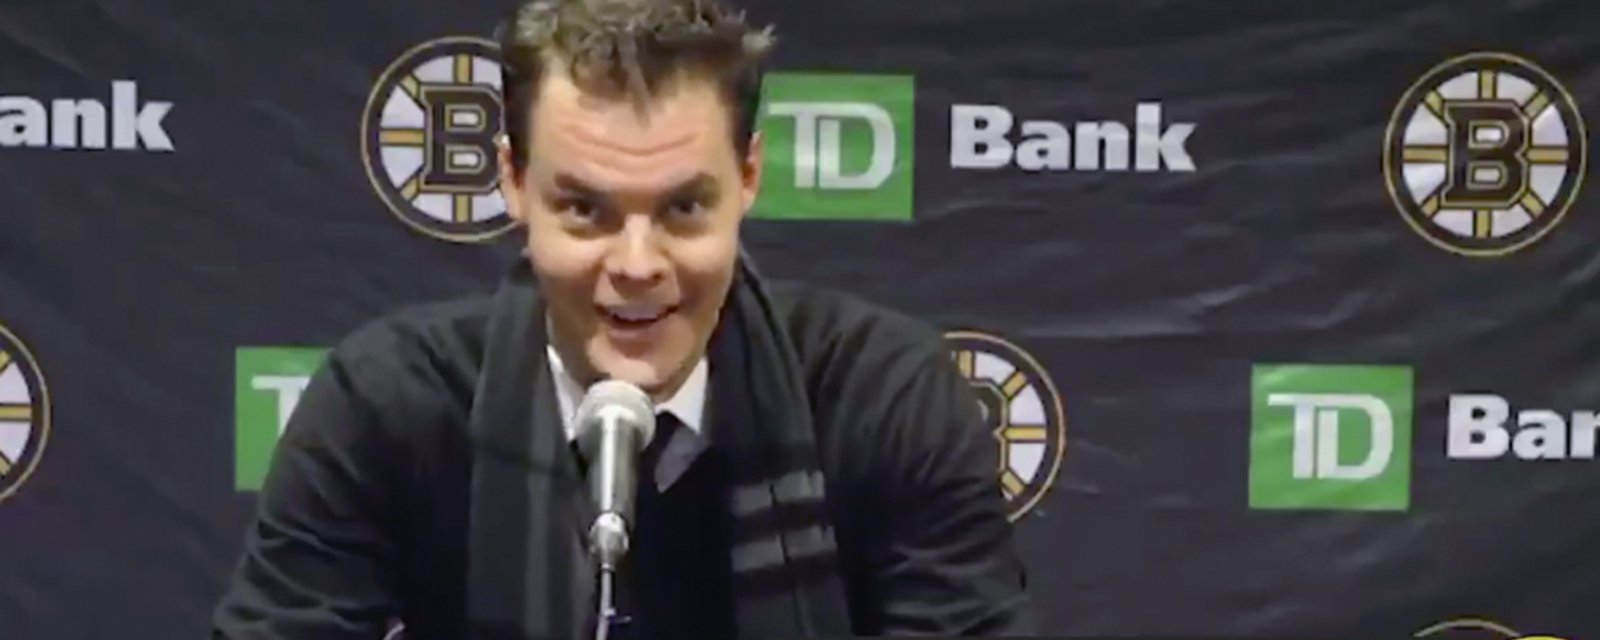 Rask explains why he left the Bruins net with just seconds left in a tie game